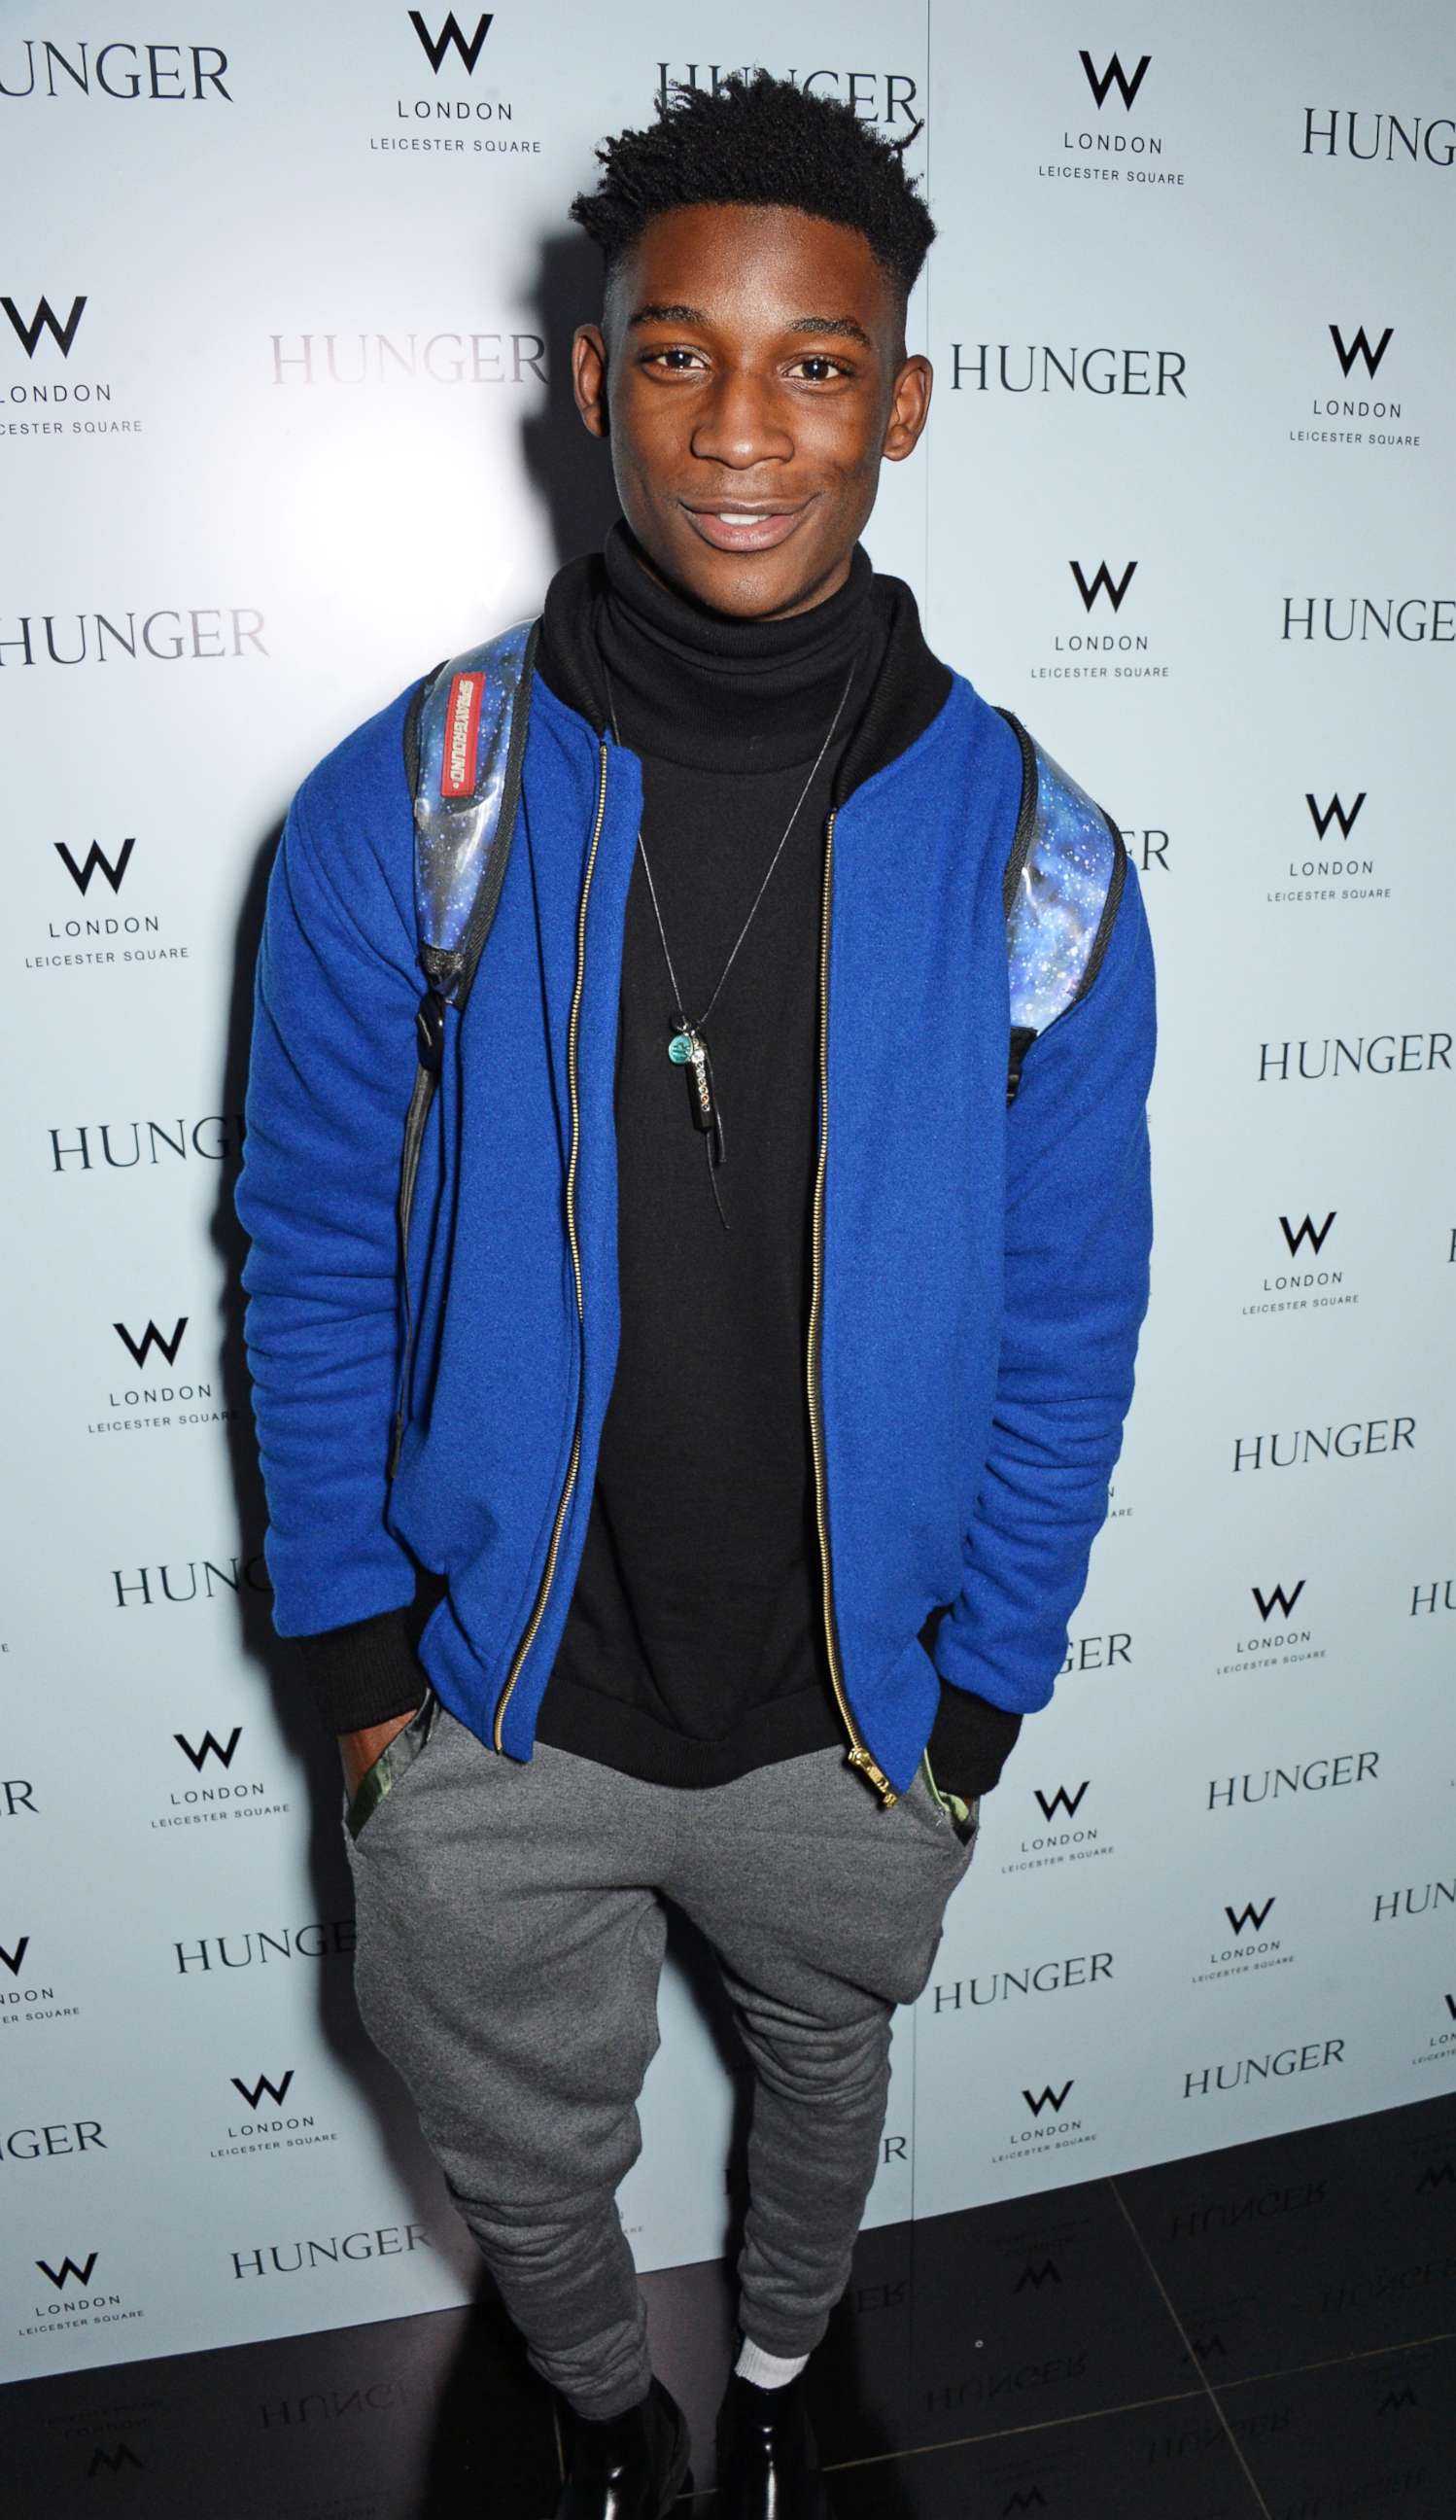 PHOTO: Harry Uzoka attends the launch of "Hunger Magazine, We've Got Issues" at W London - Leicester Square, Feb. 20, 2015 in London.